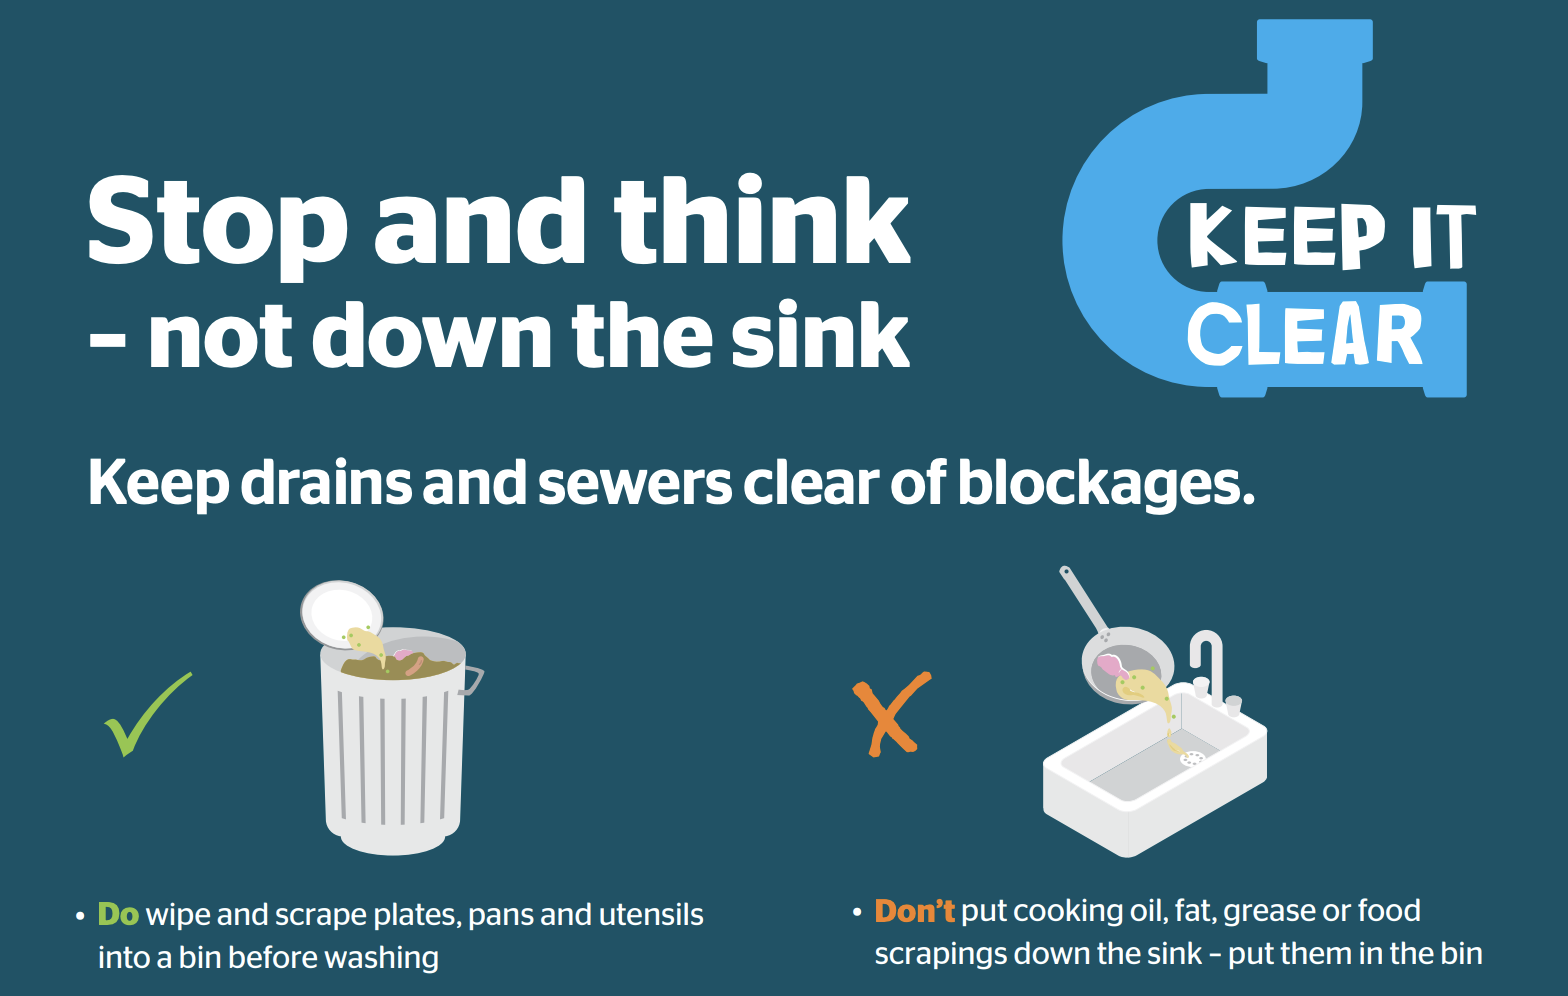 A poster that informs what not to put down the drain